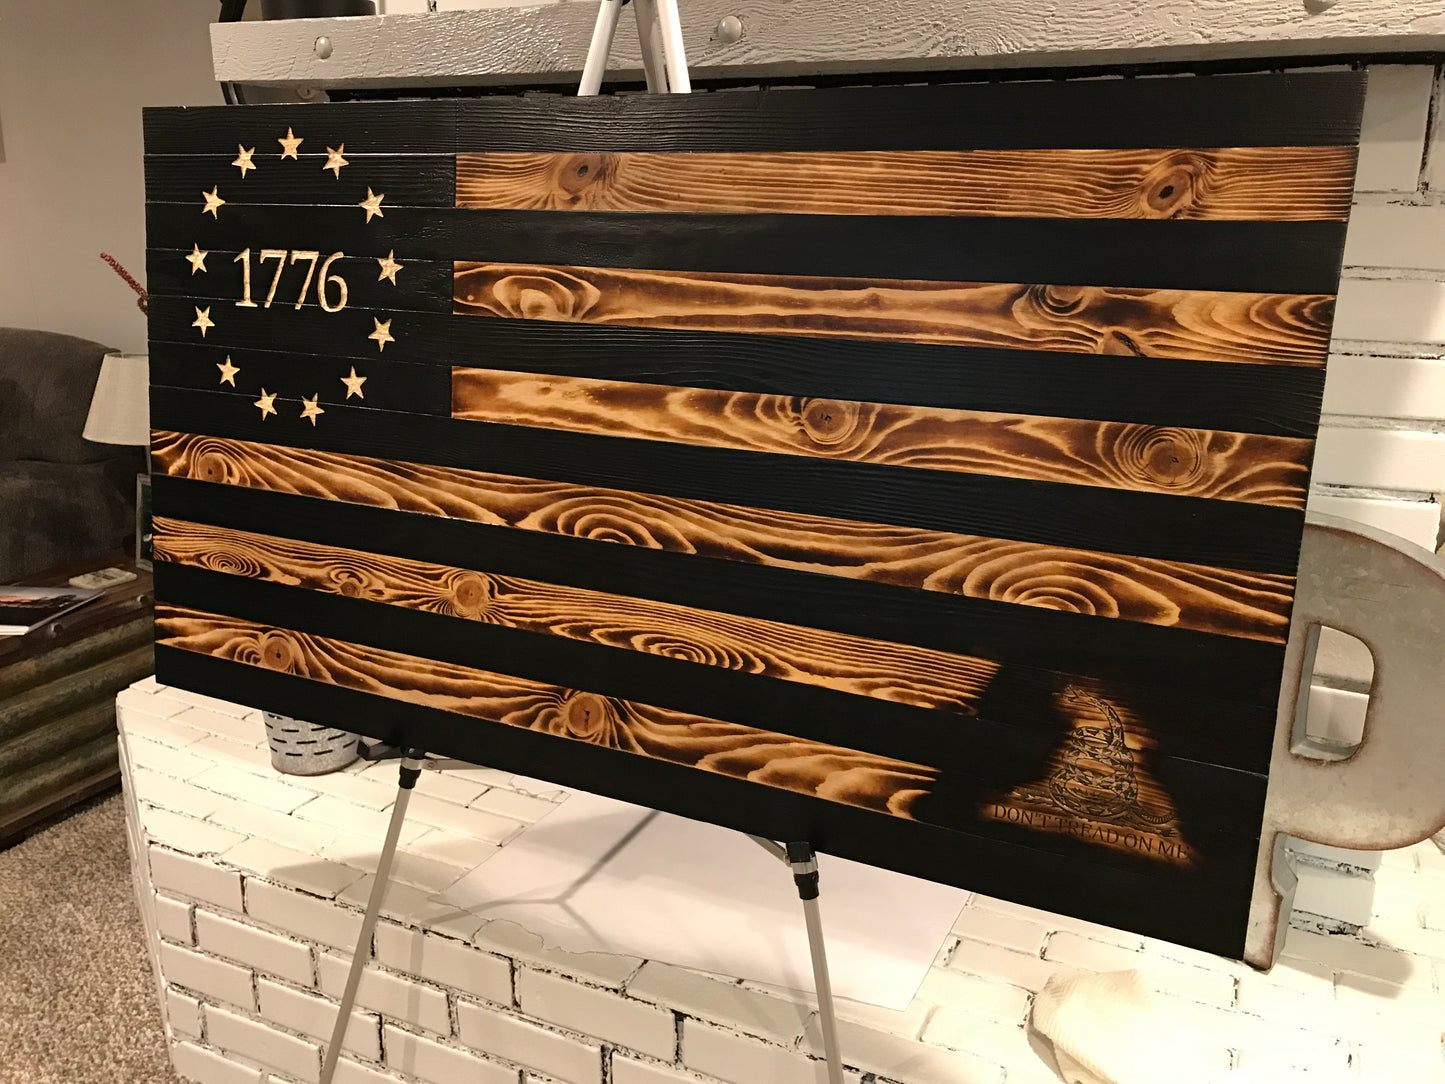 The Rustic Betsy Ross with Gadsden "Don't Tread on Me" engraved